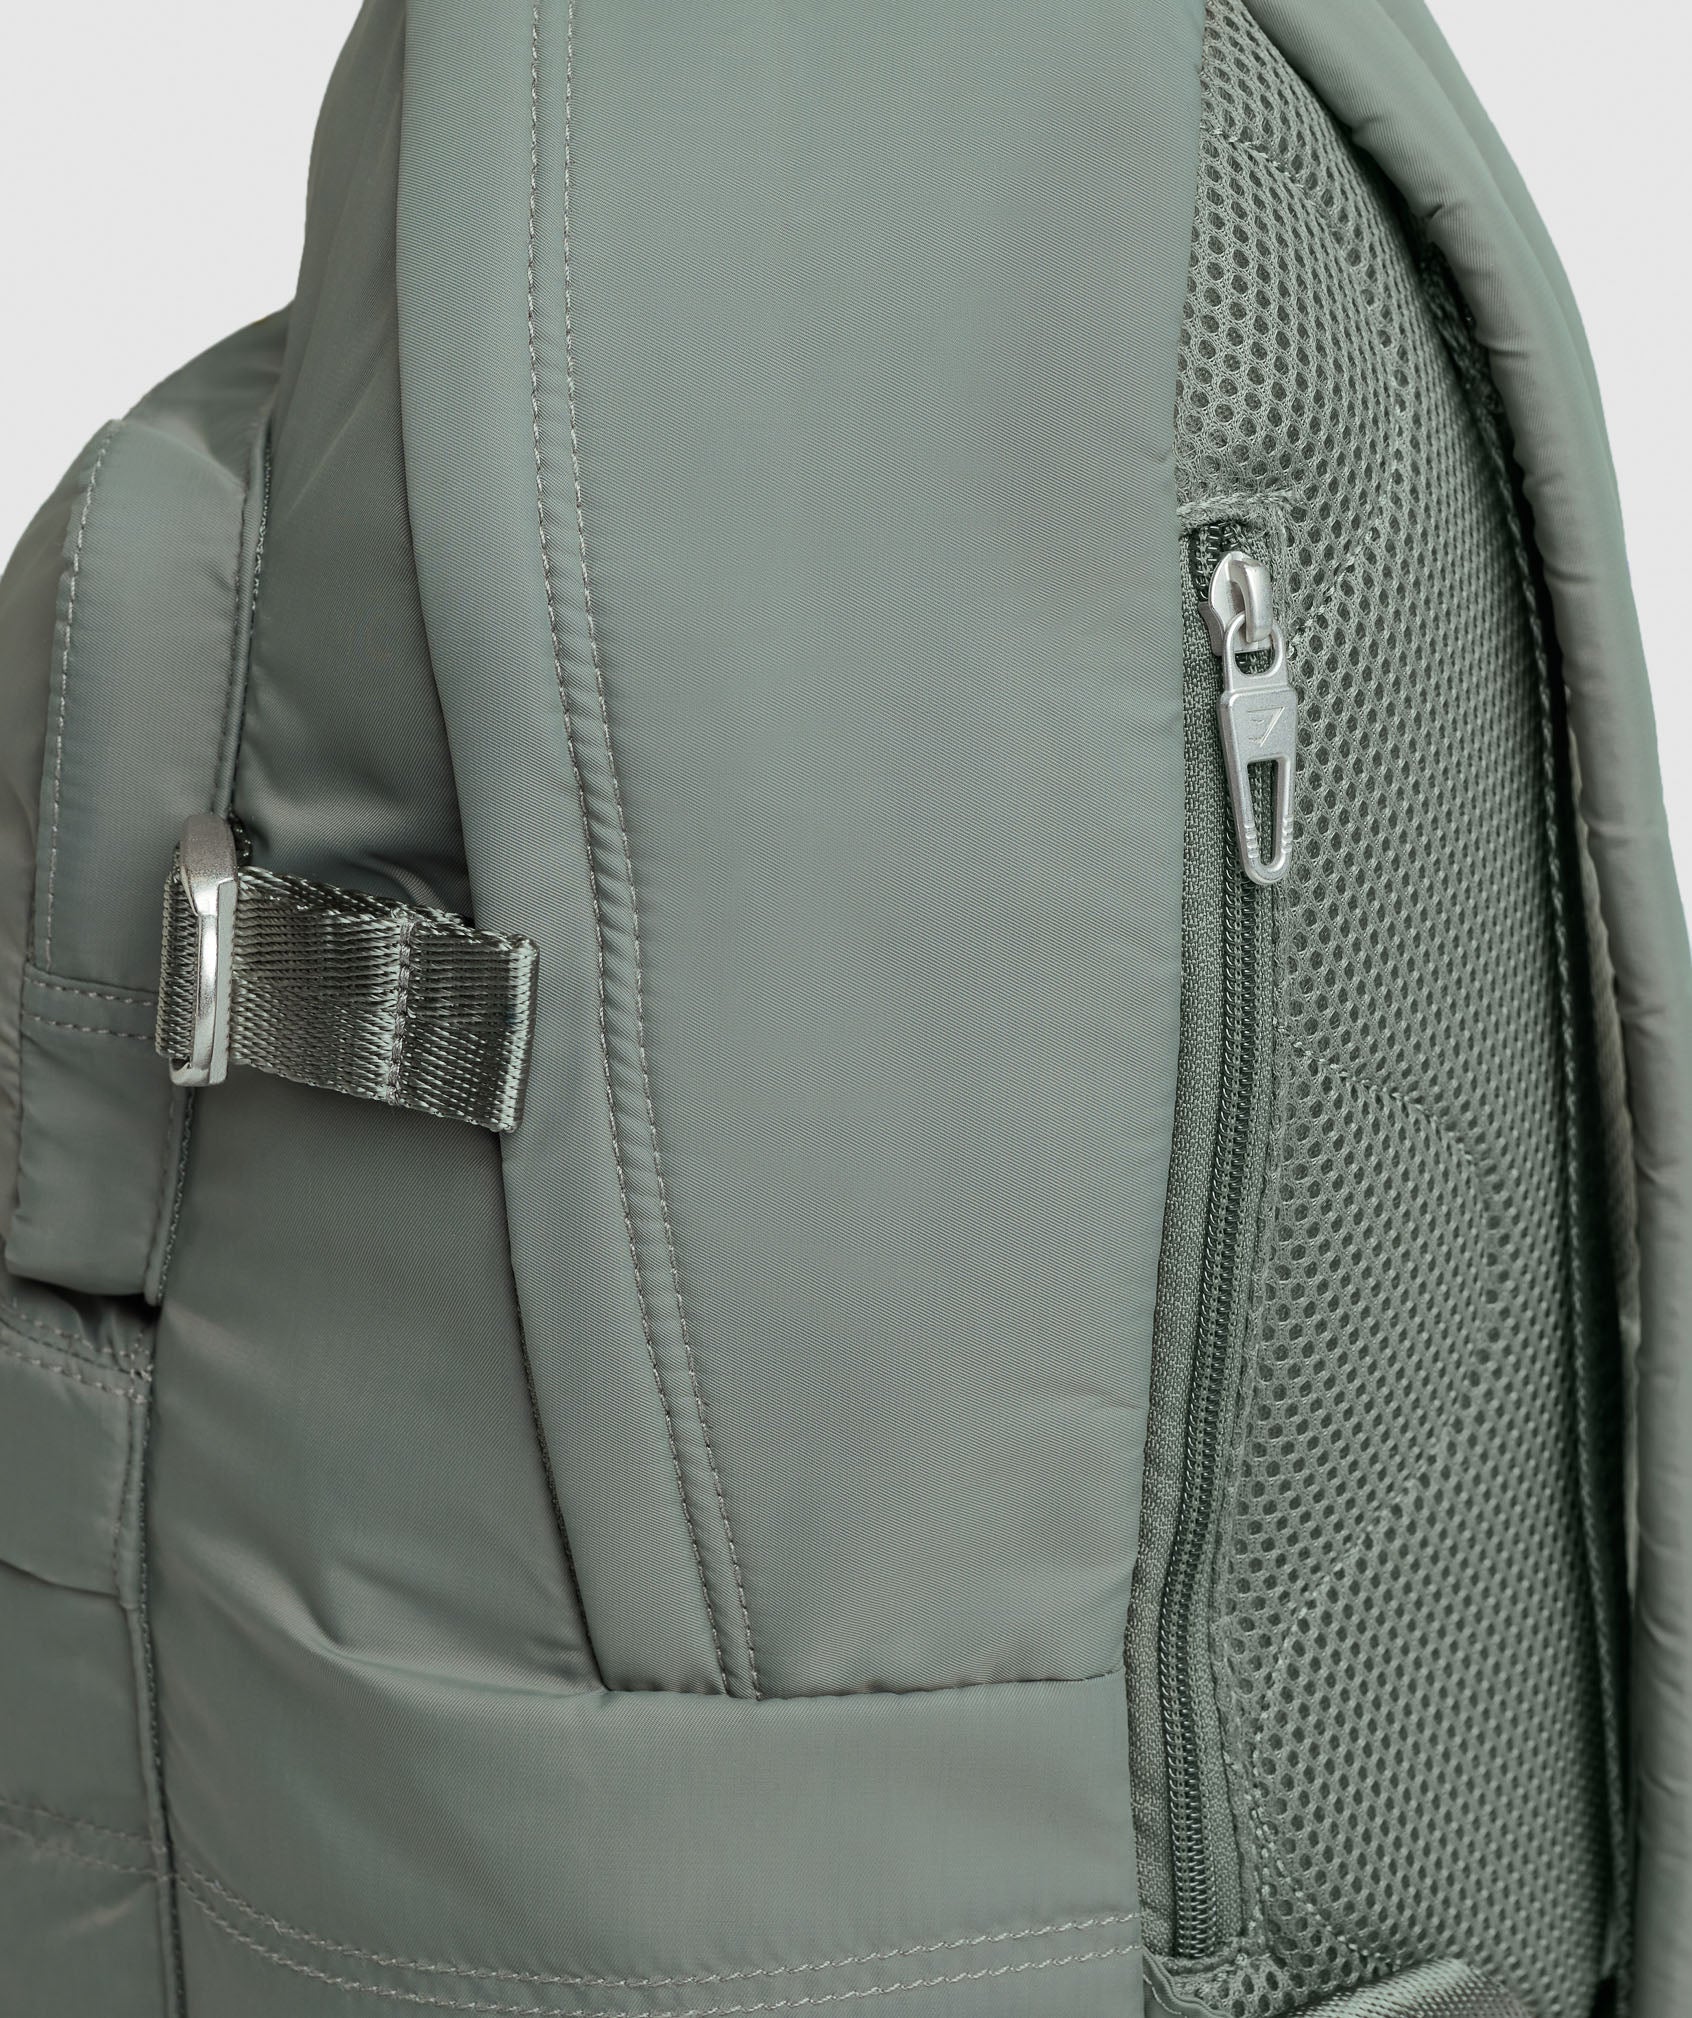 Premium Lifestyle Backpack in Dusk Green - view 3